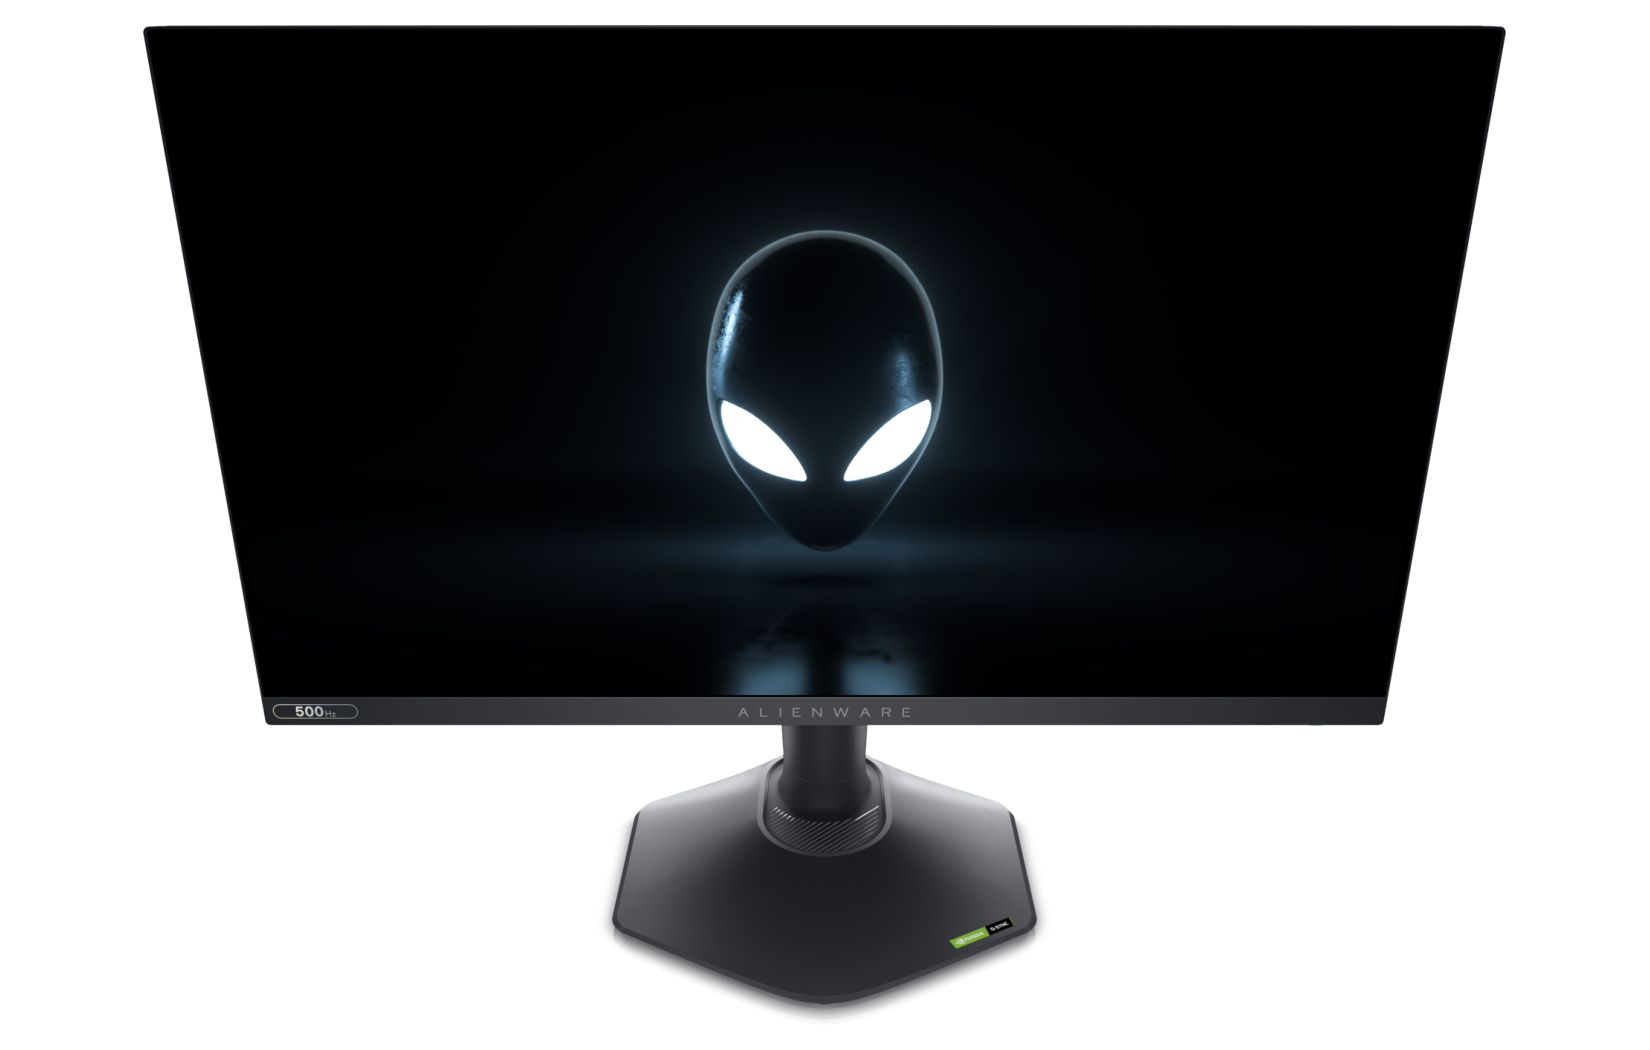 Alienware 360Hz Gaming Monitor 24.5 Inch FHD (Full HD 1920 x 1080p), NVIDIA  G-SYNC Certified, 100mm x 100mm VESA Mounting Support, Dark Side of The  Moon 